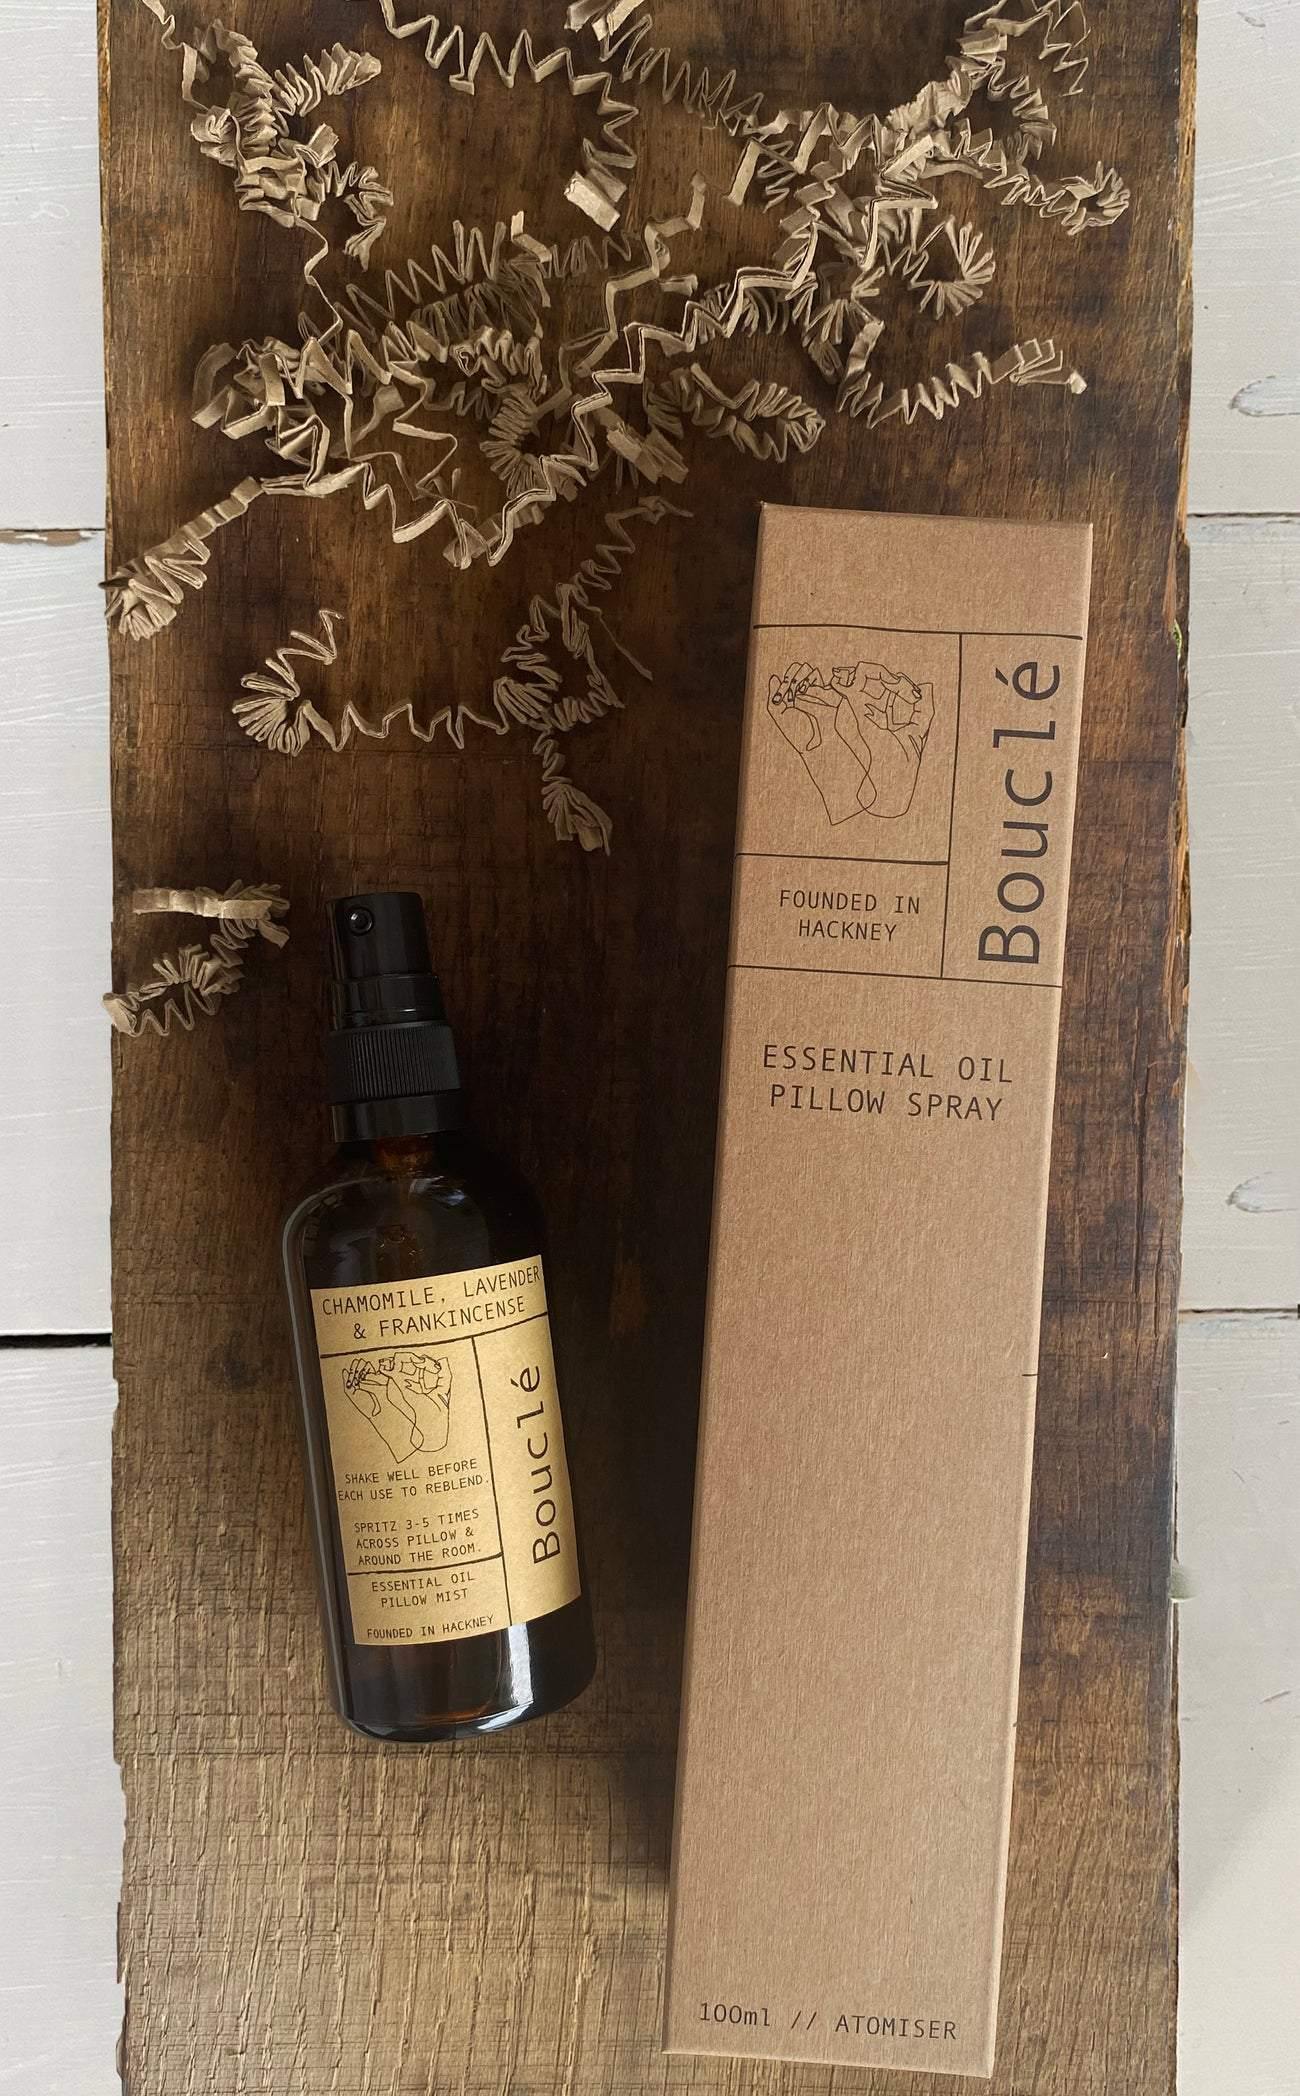 Bouclé relax pillow spray with plastic free packaging, perfect for gifting or to use for a better sleep ritual. Relax with these all natural Bouclé London blends.